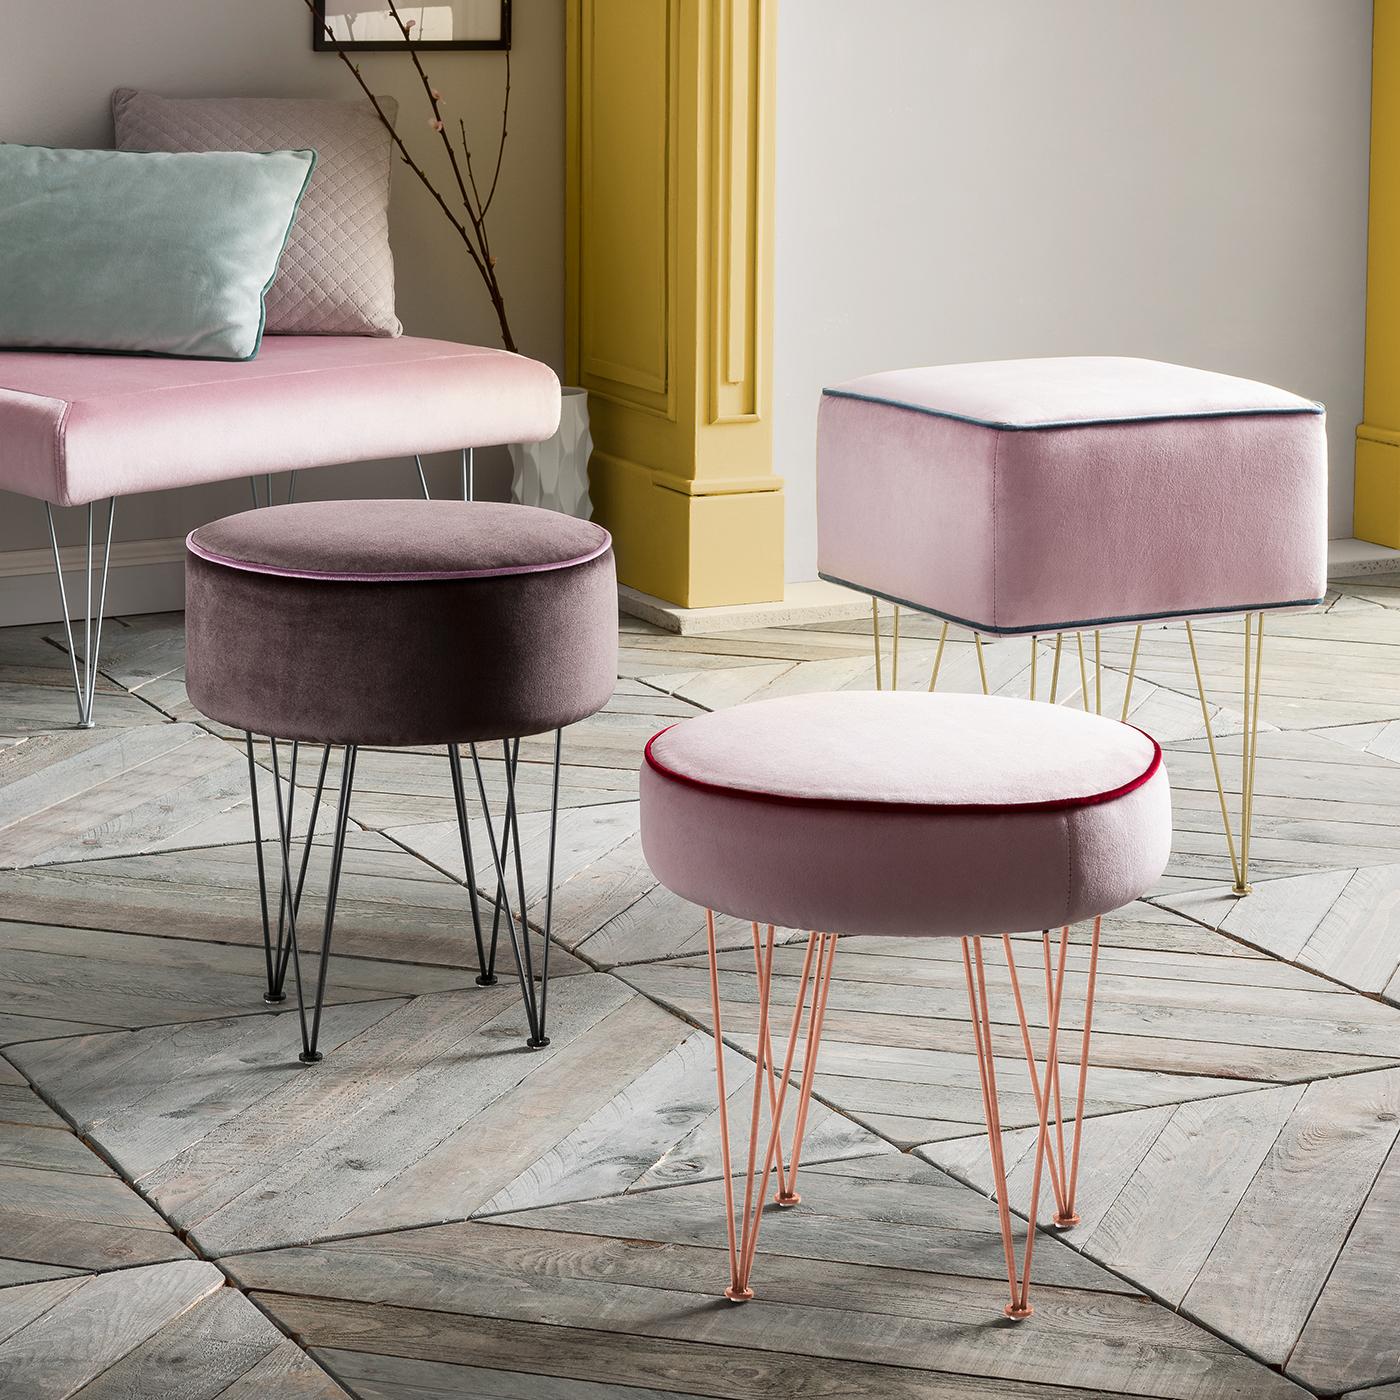 This expertly crafted pouf is made with eco-friendly and sustainable materials and features four metal hairpin legs with a copper galvanic finish that provide support while appearing light and airy. The polyurethane-padded square top of fir, pine,